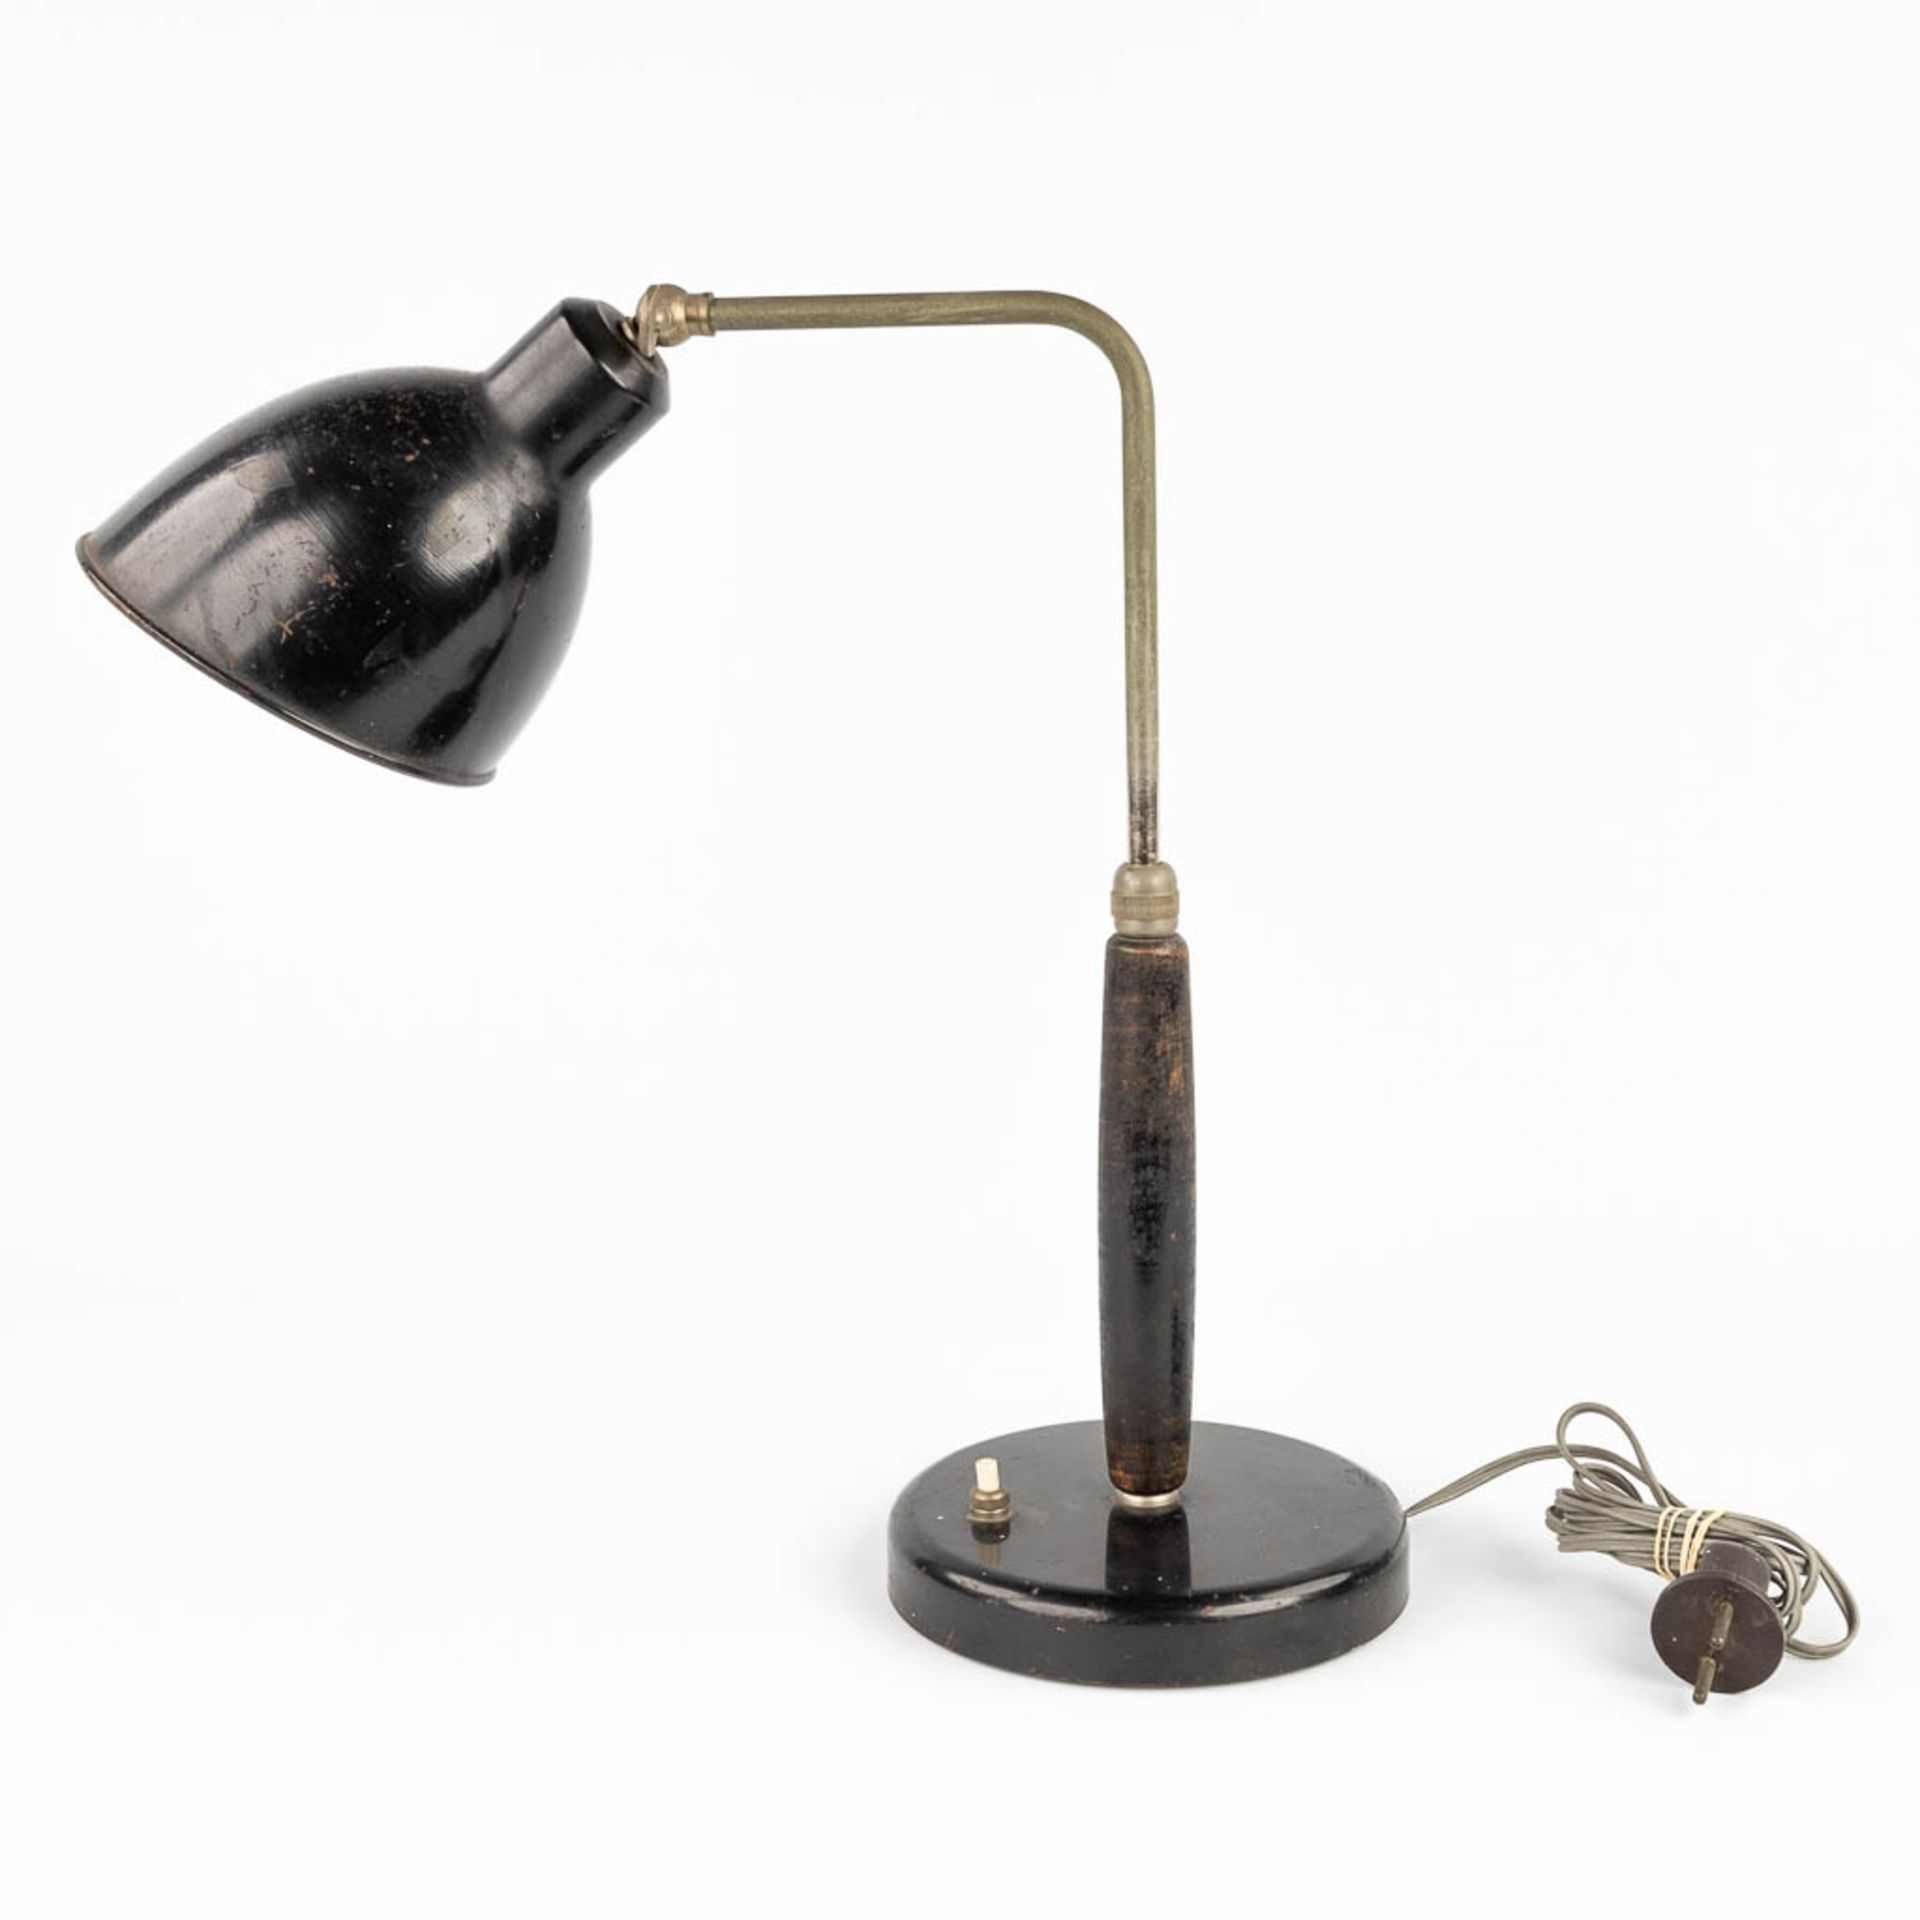 Christian DELL (1893-1974) 'Table lamp' made of metal and wood. (H:37 x D:16 cm) - Image 5 of 12